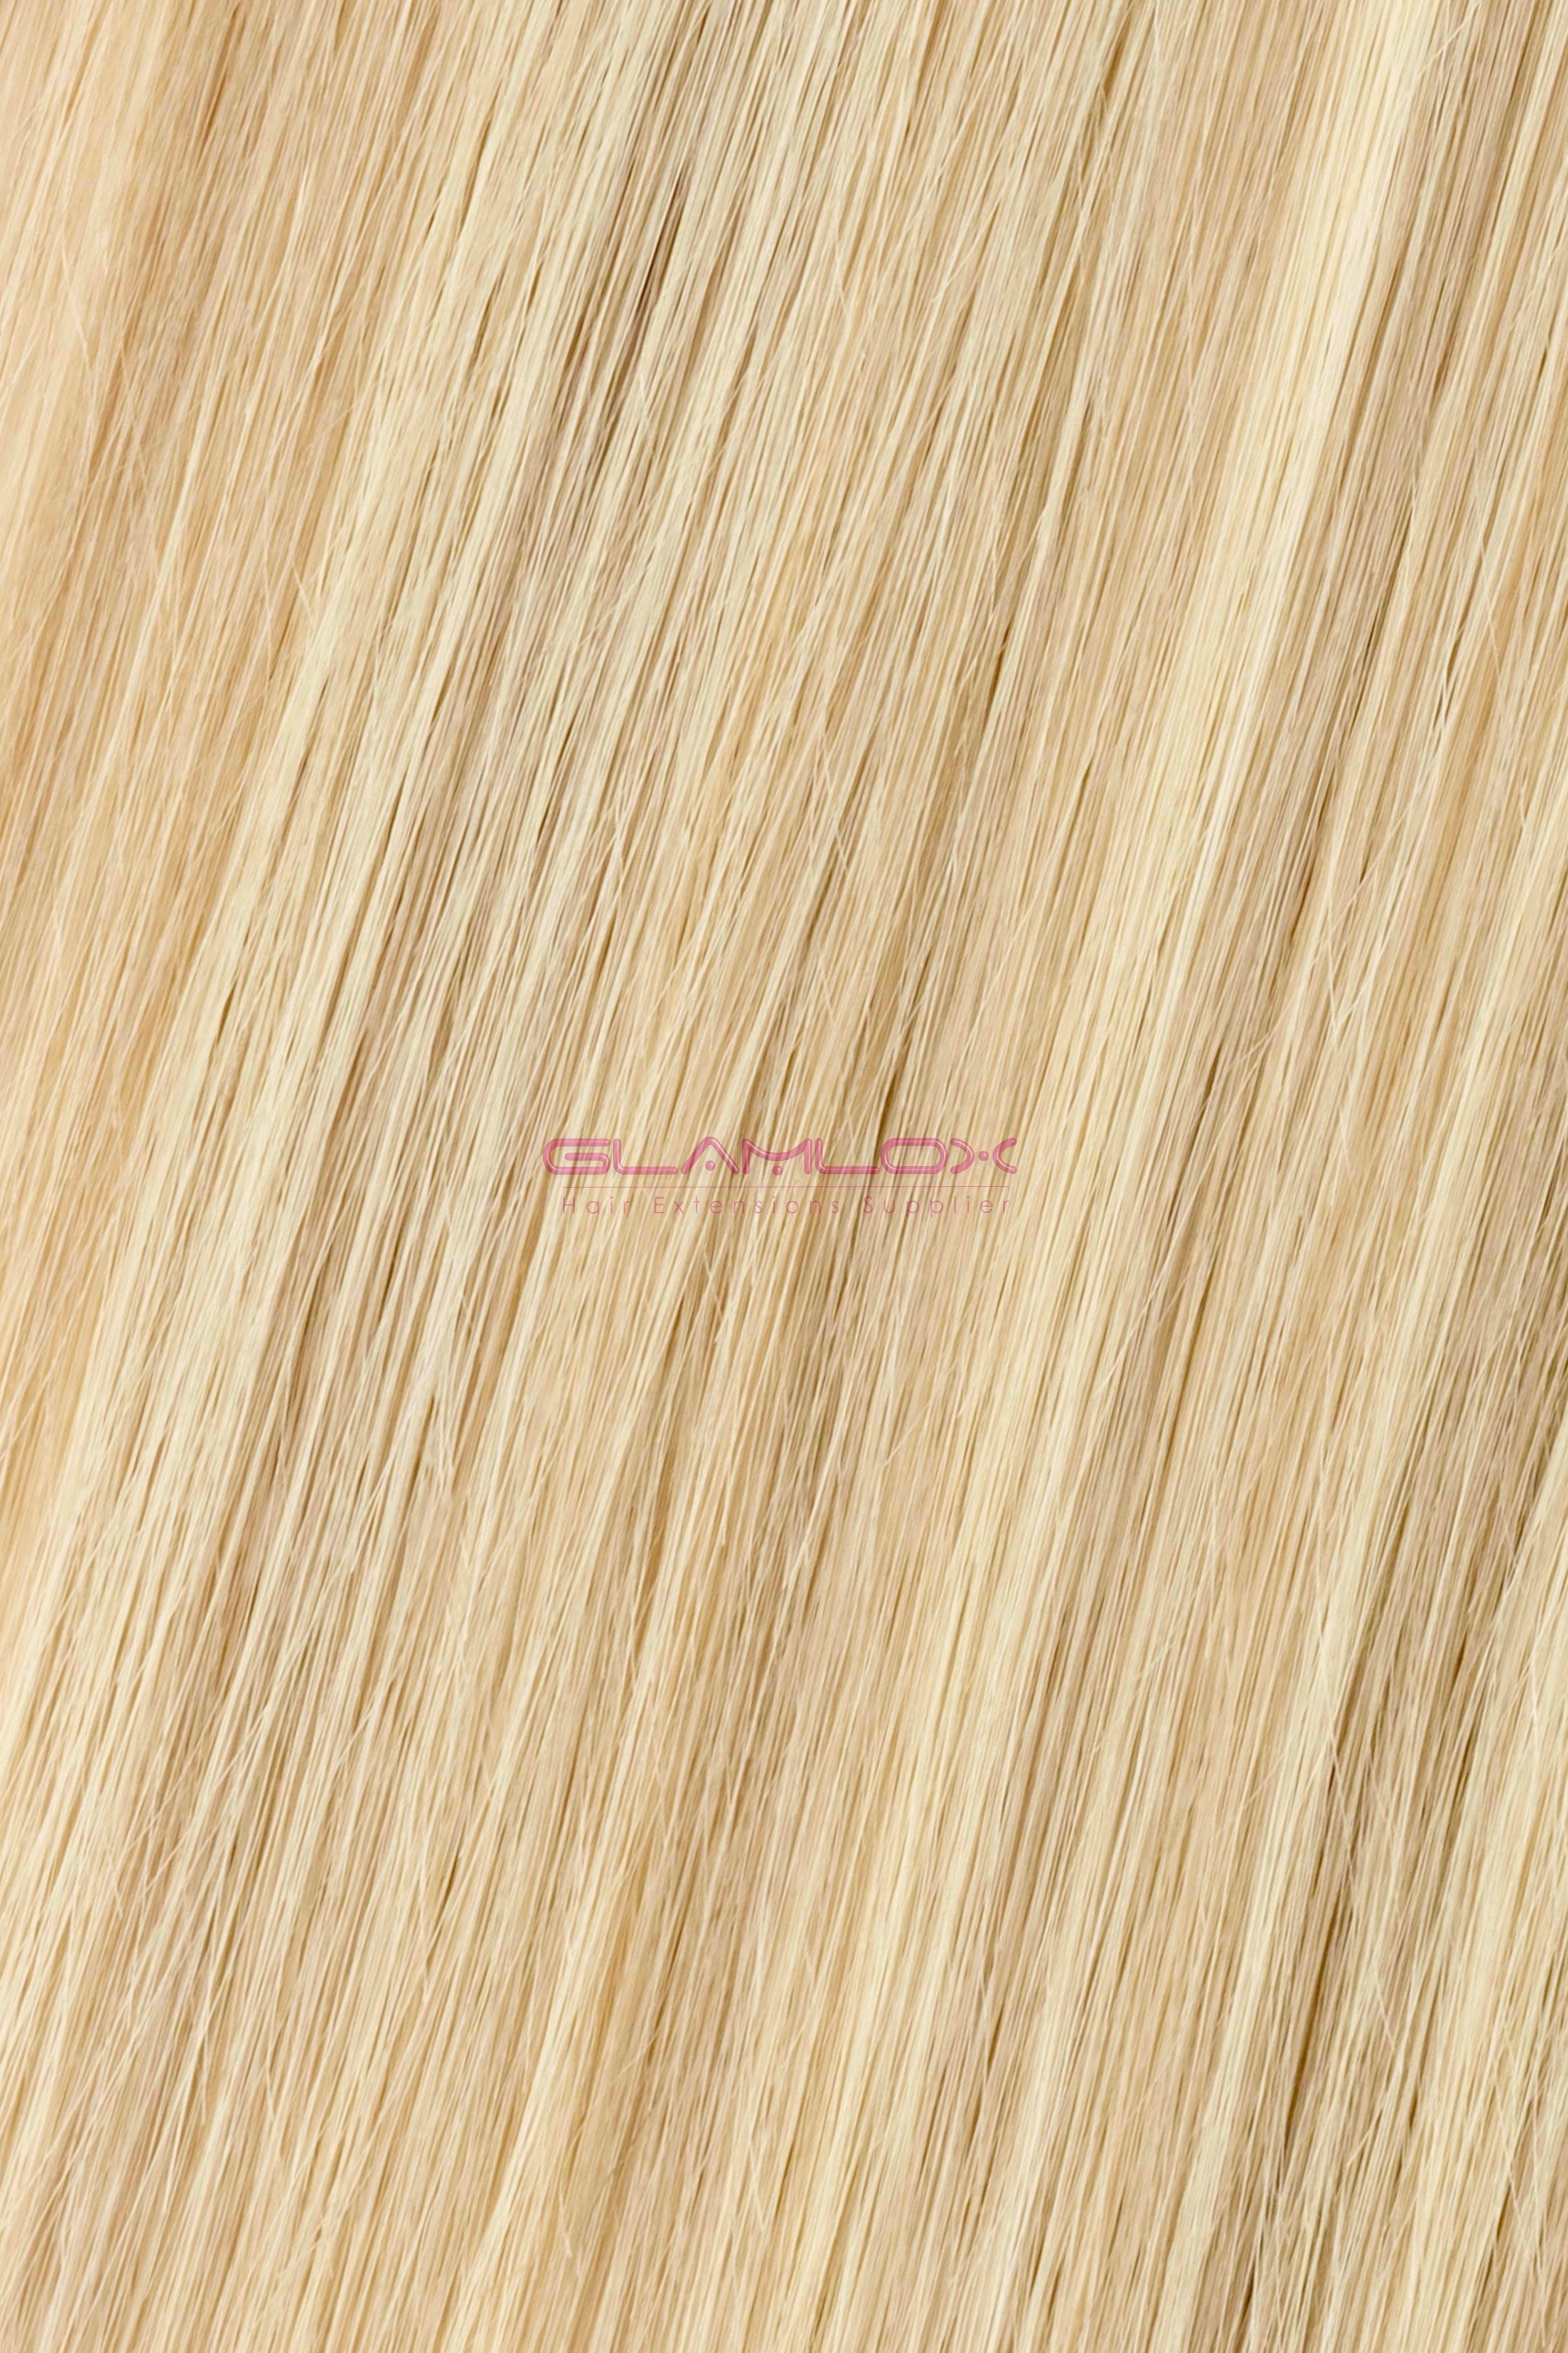 20" Pre-Bonded - Russian Mongolian Double Drawn Remy Human Hair - 100 Strands